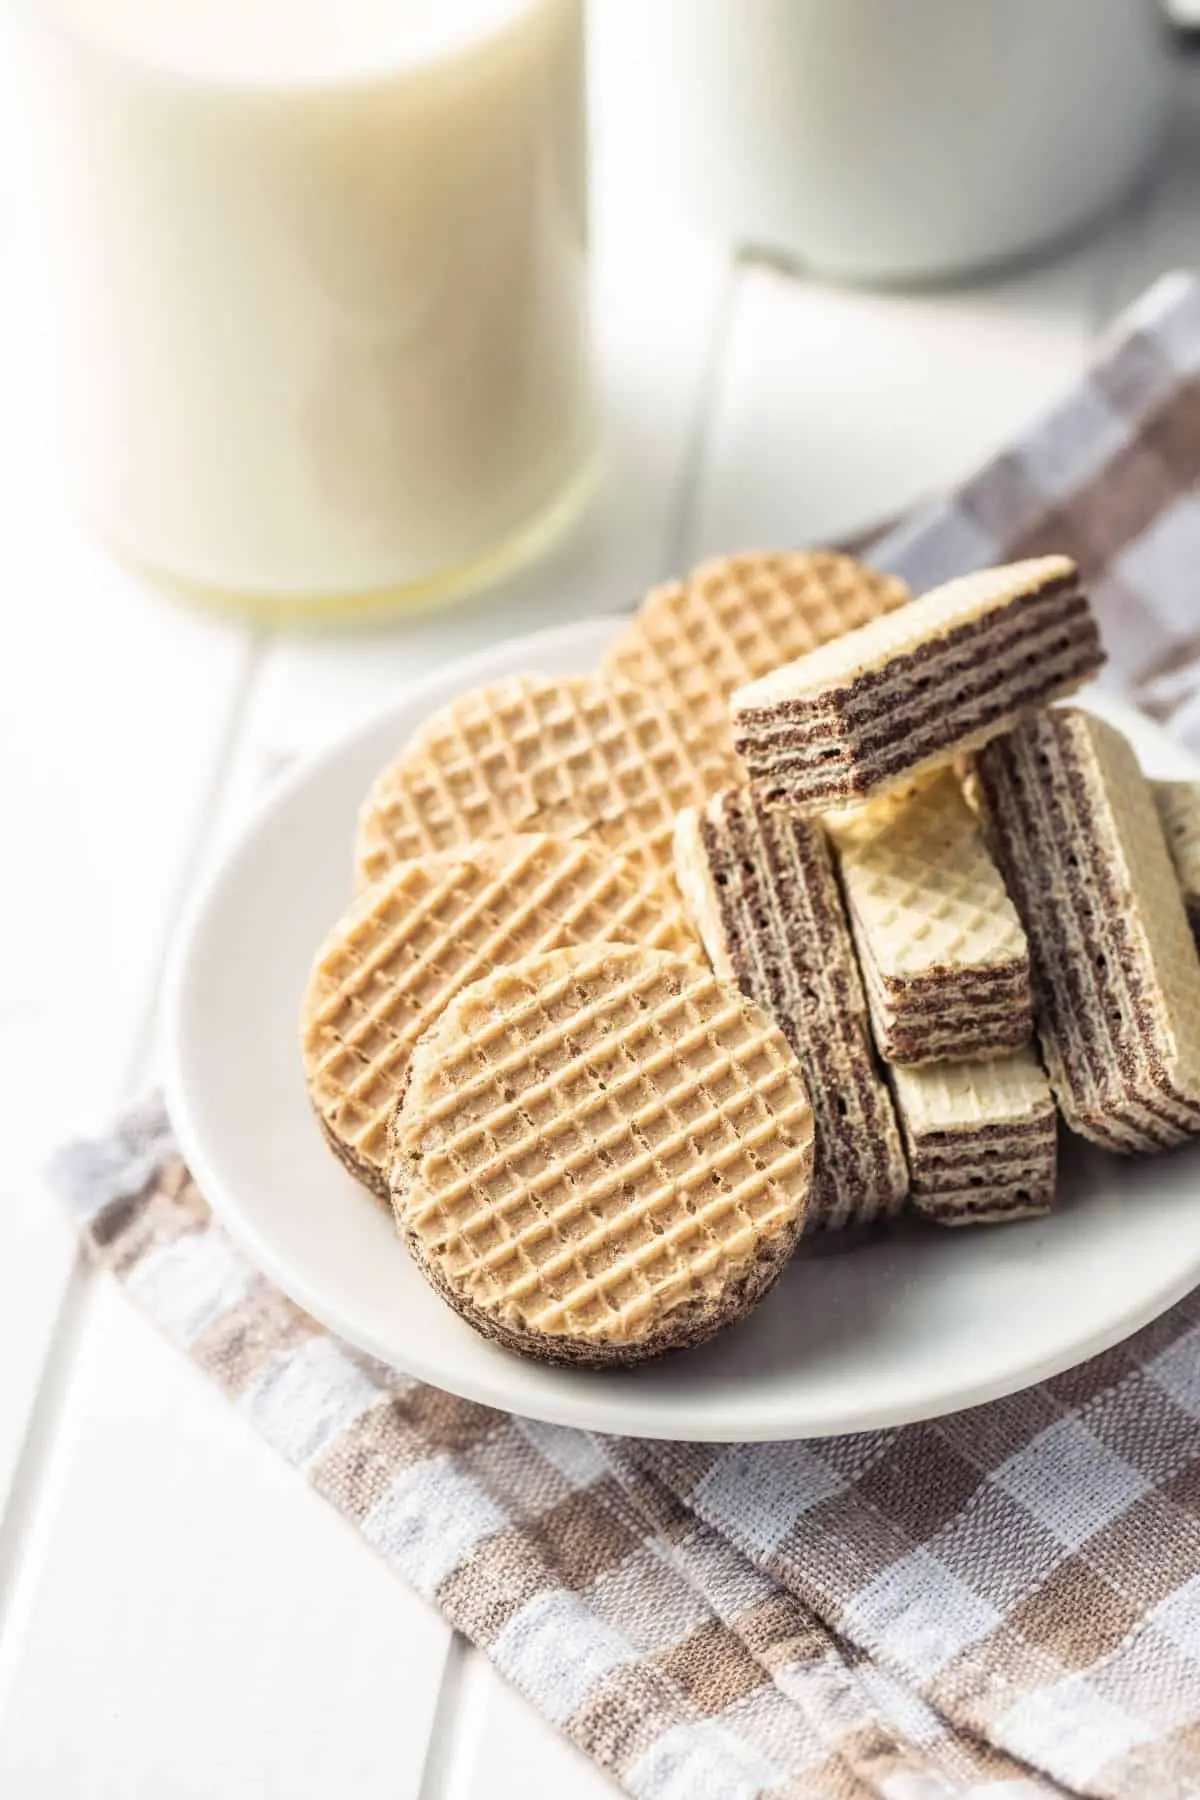 How To Make Wafer Cookies